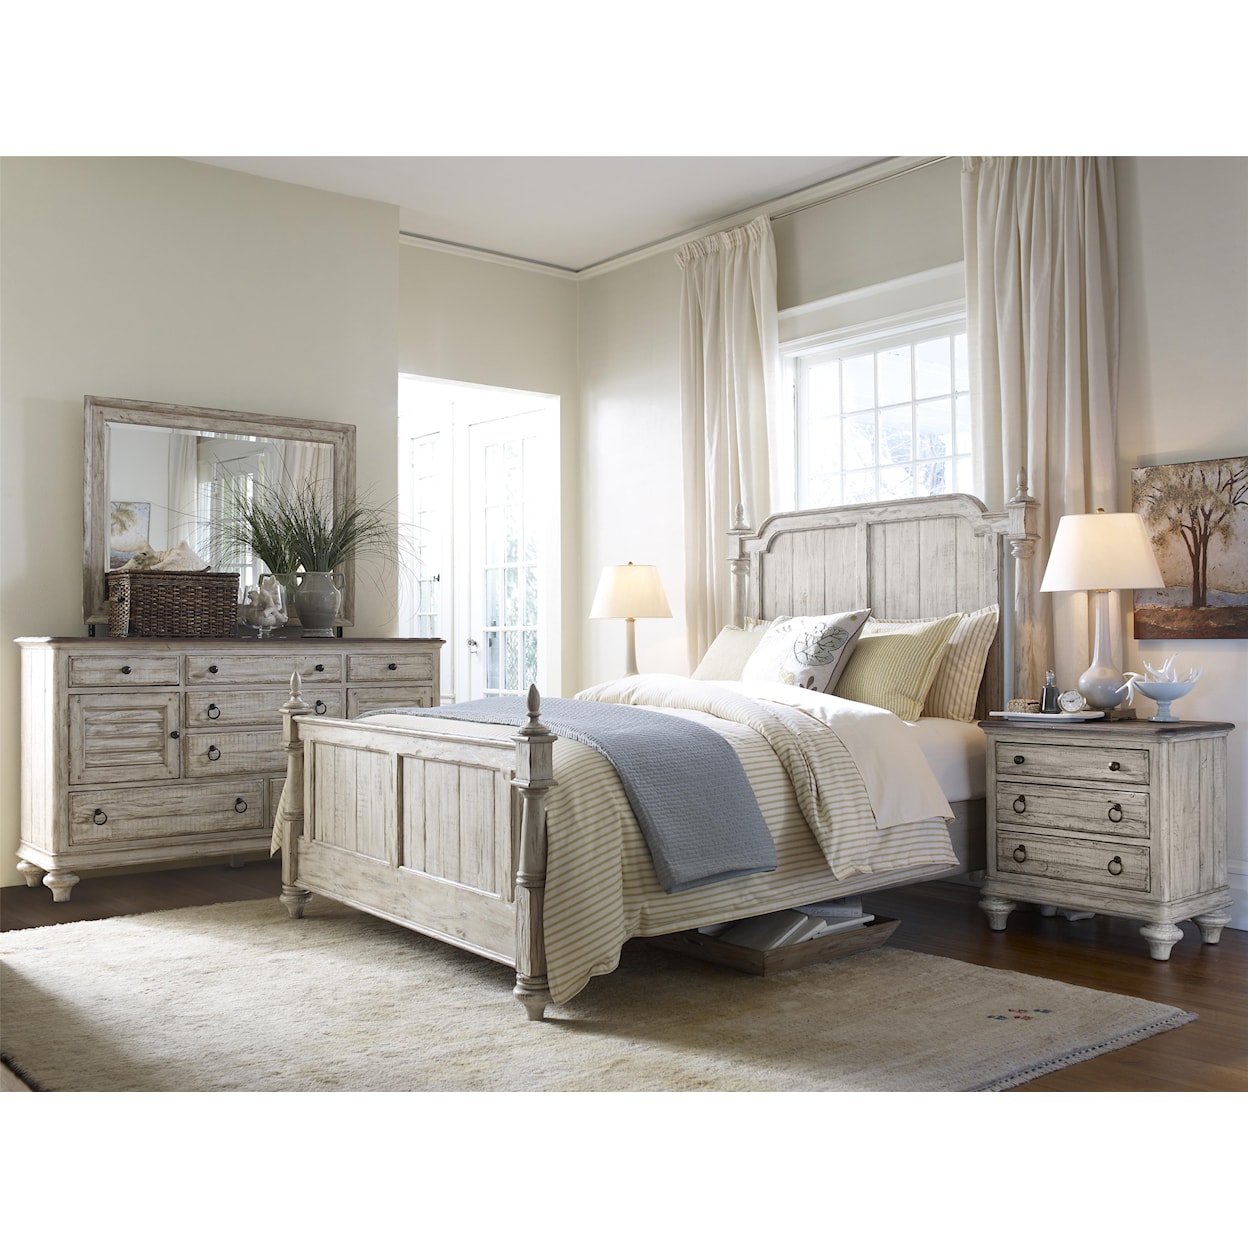 Kincaid Furniture Weatherford Queen Bedroom Group